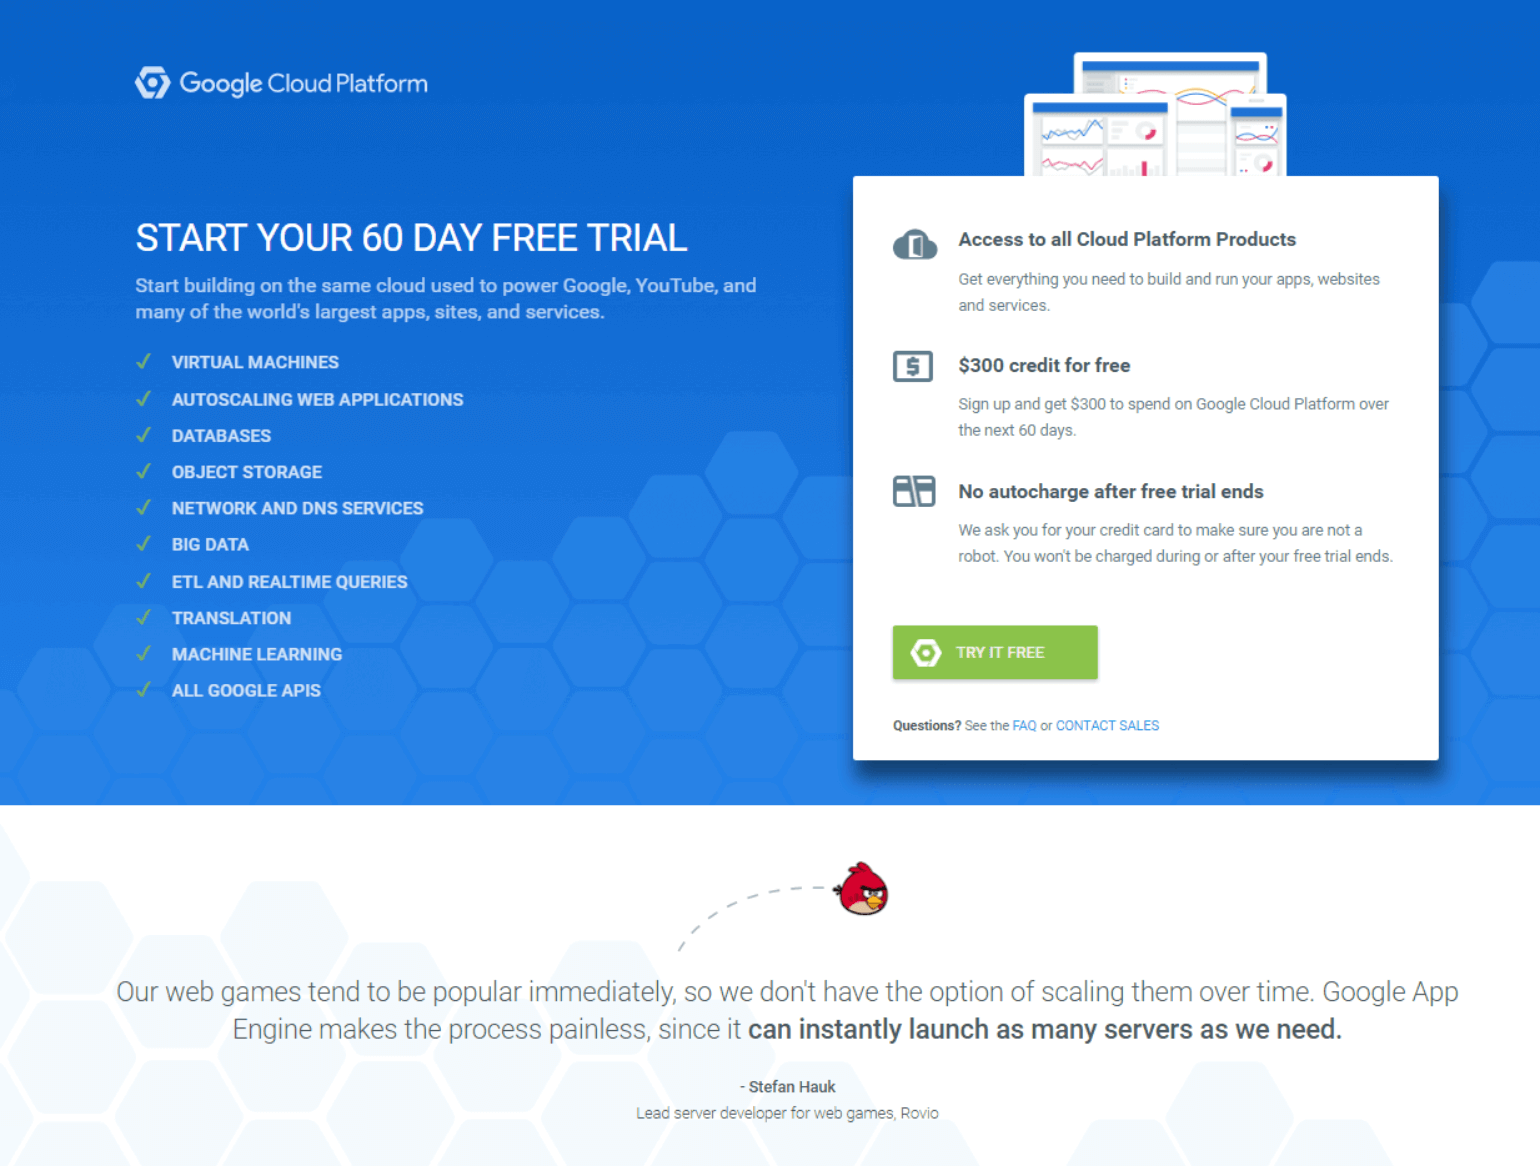 A landing page for Google Cloud offering a 60 Day free trial